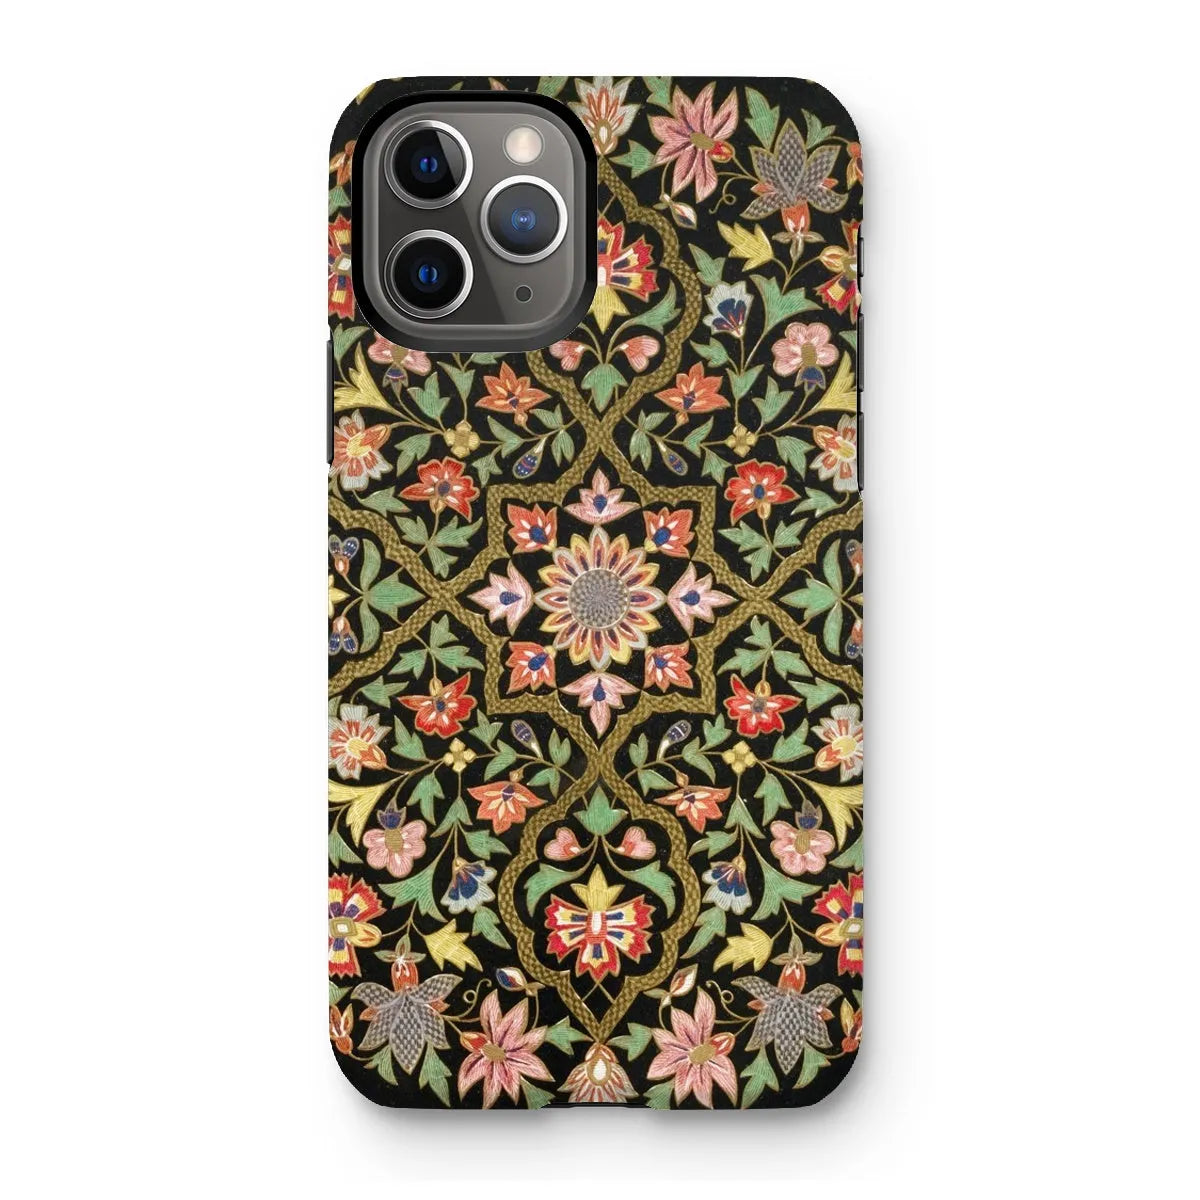 Indian Embroidery - Aesthetic Pattern Art Phone Case - Iphone 11 Pro / Matte - Mobile Phone Cases - Aesthetic Art